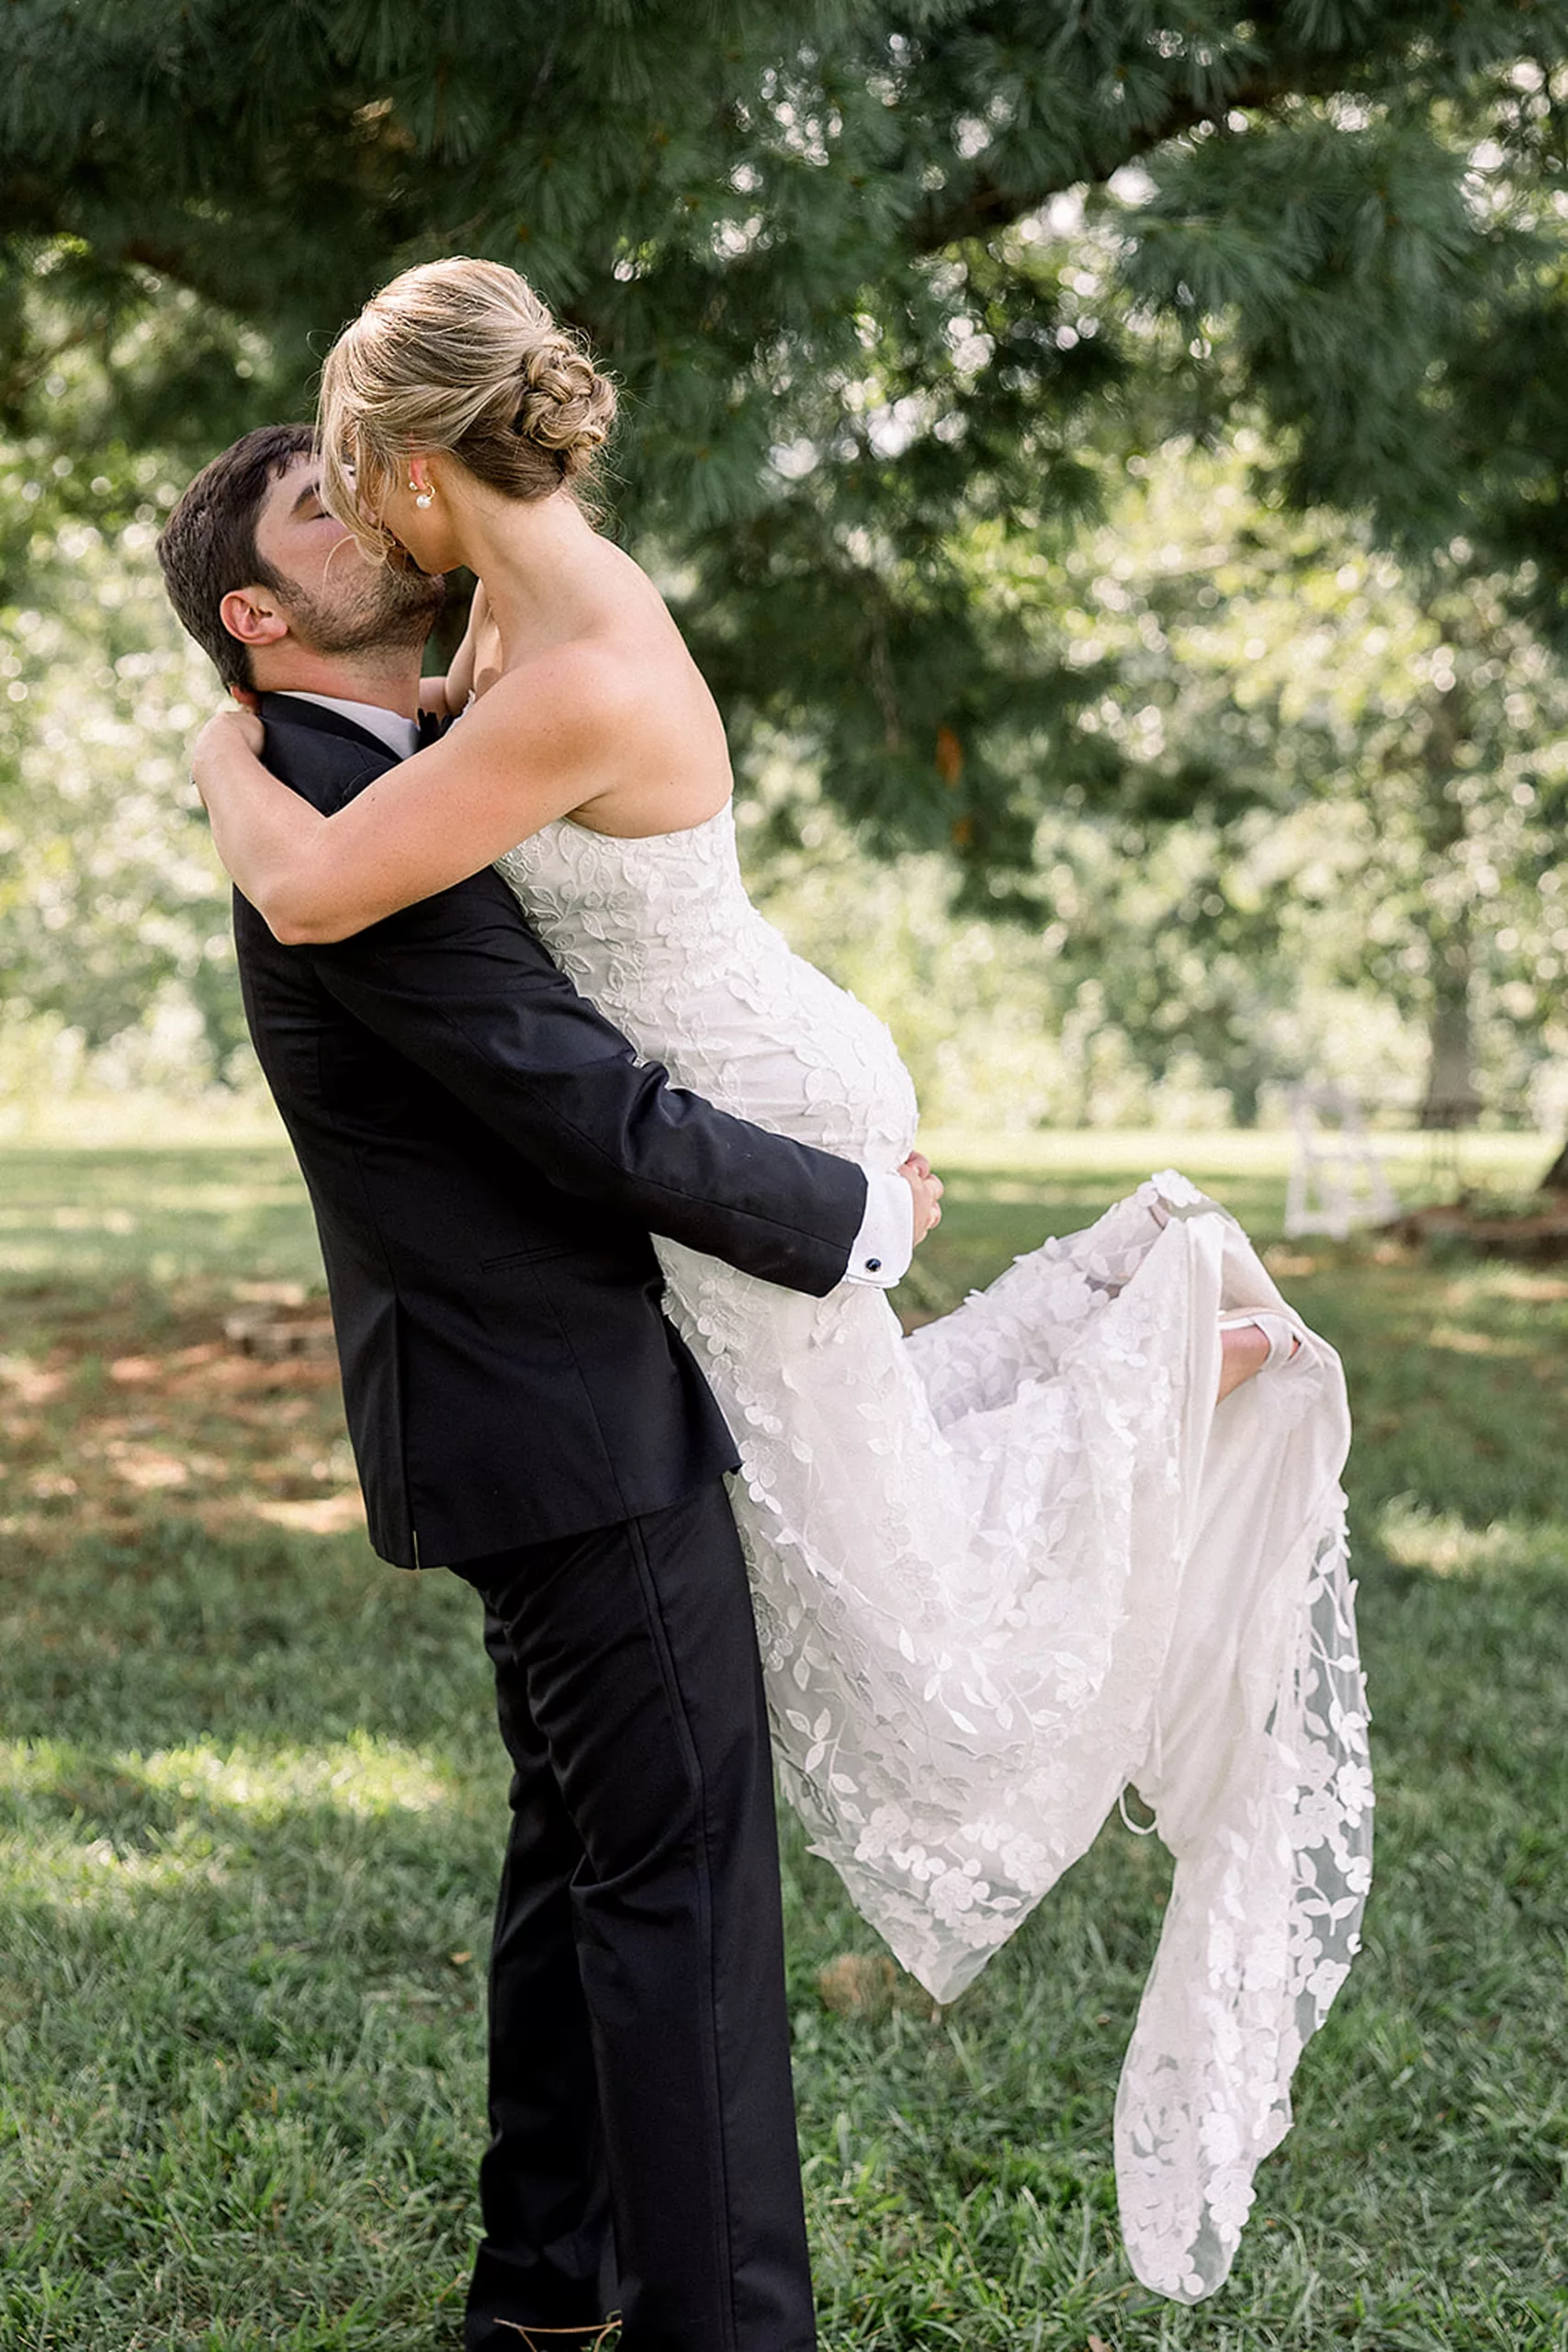 A groom lifts and kisses his bride in a field under trees